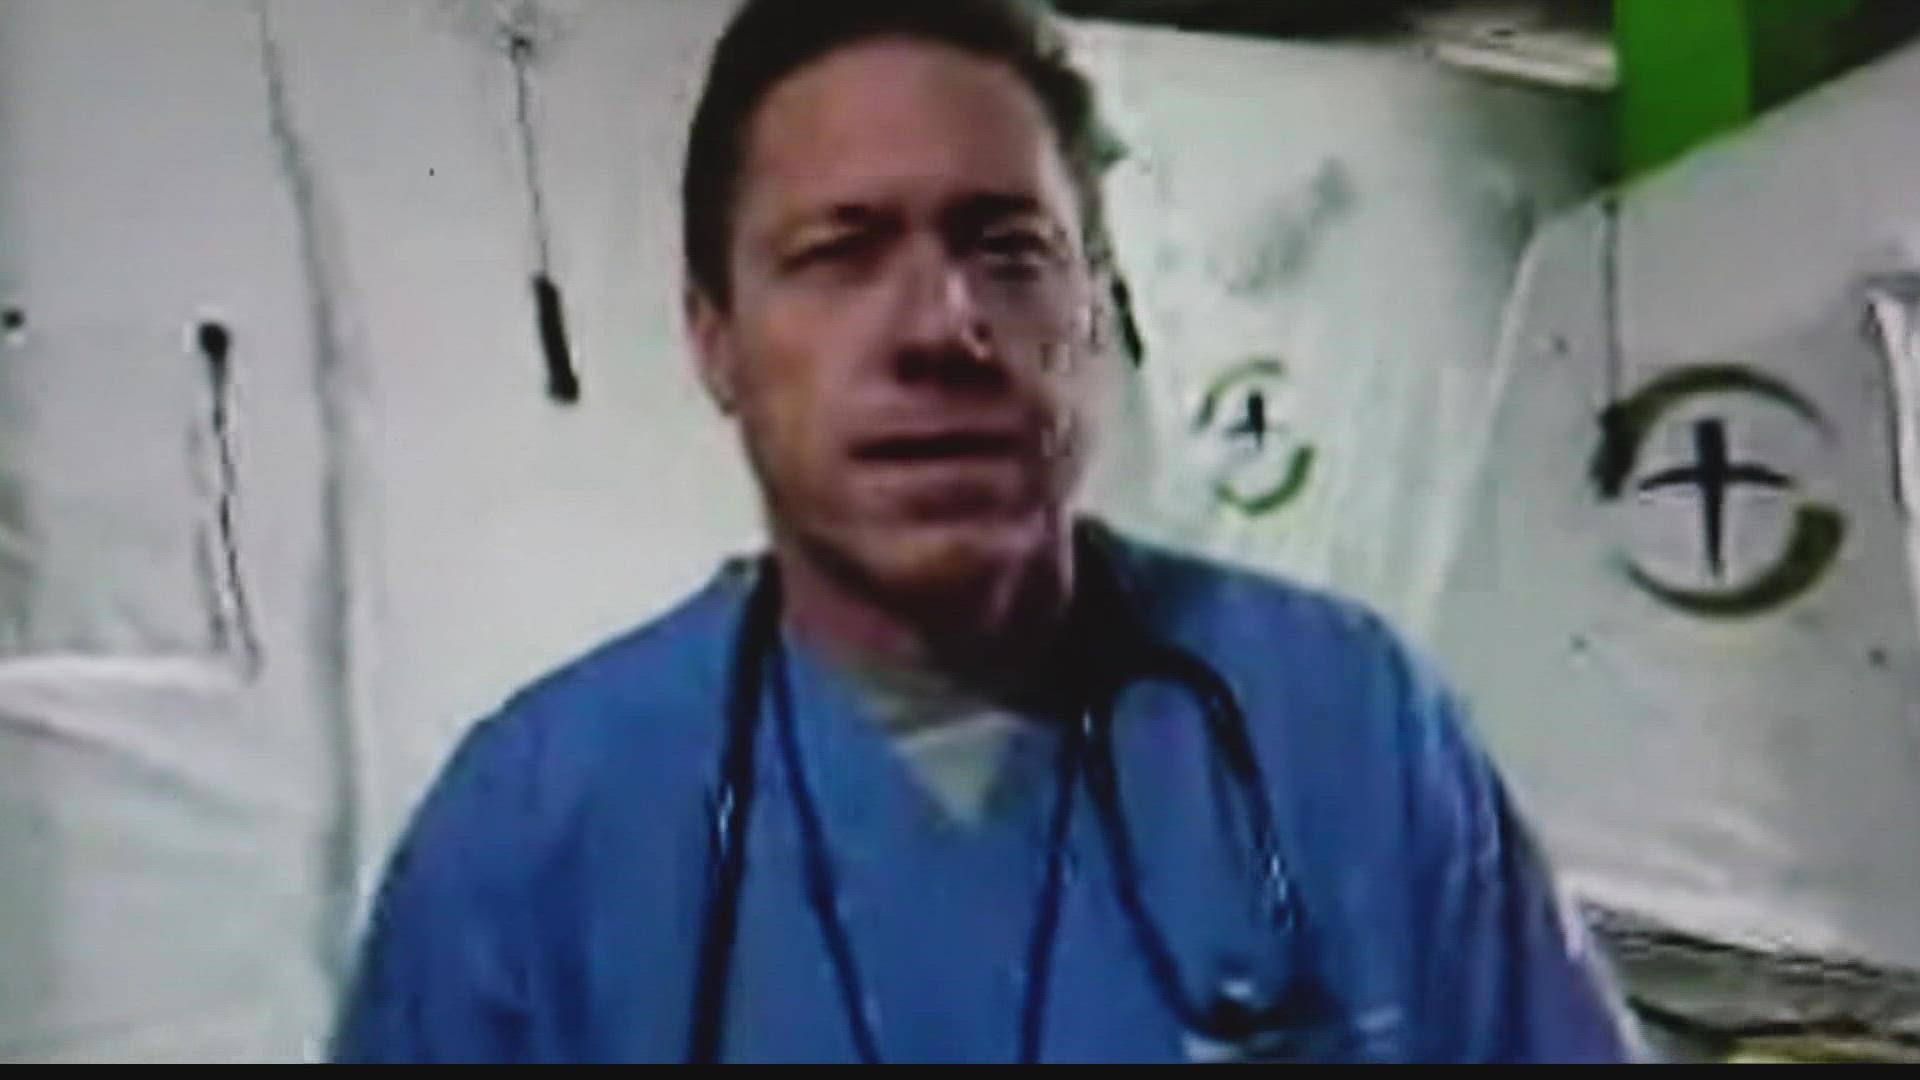 One of the doctors treating the wounded and helping on the frontlines is from Indiana.